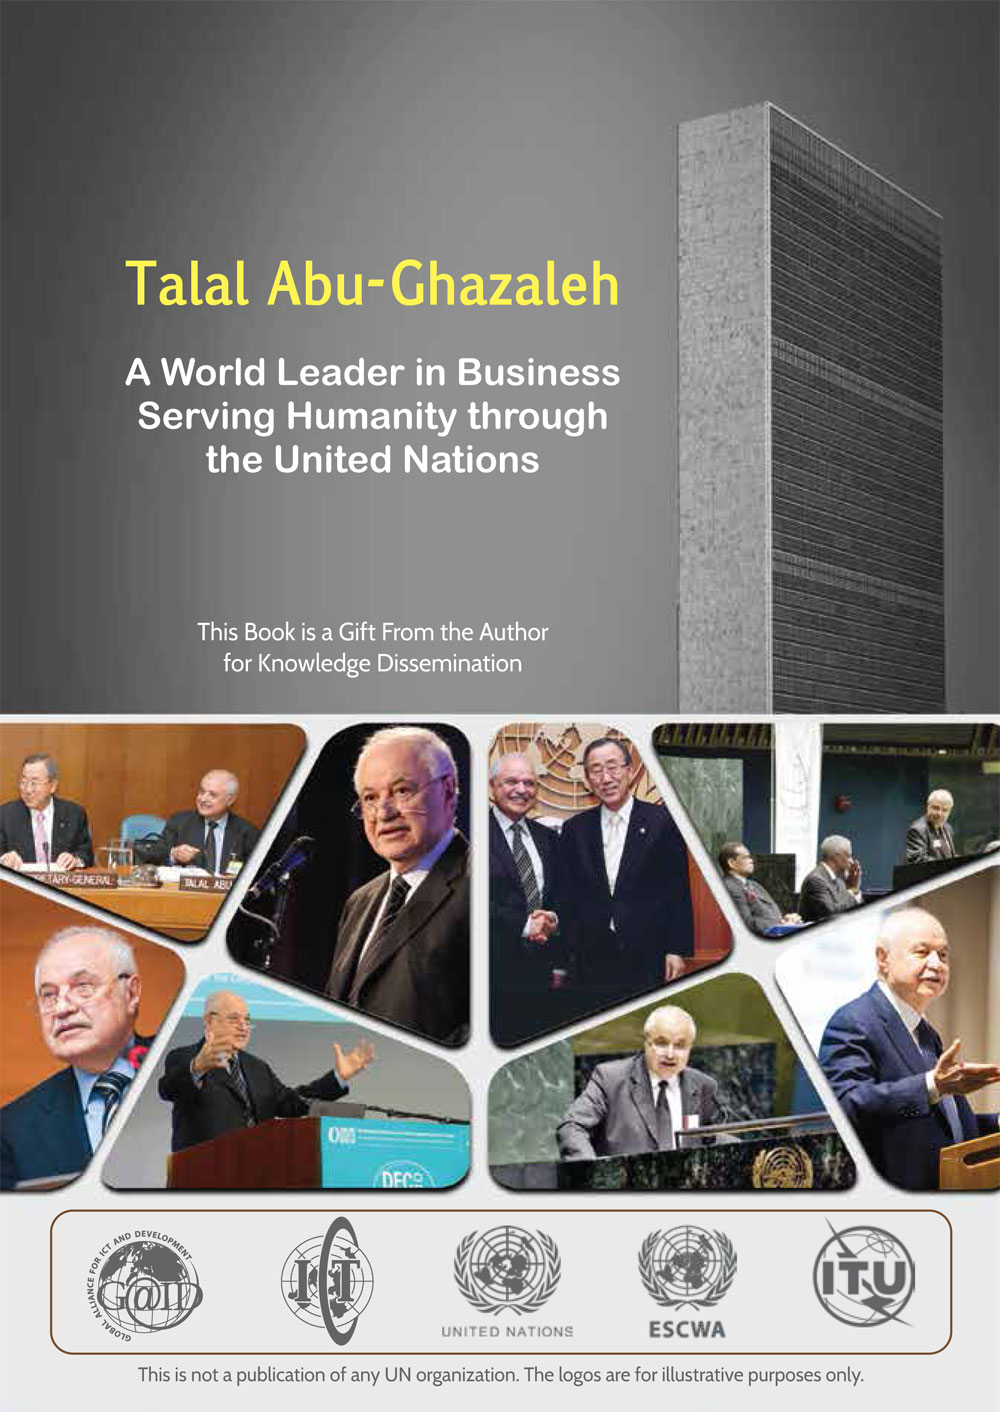 Talal Abu-Ghazaleh, A World Leader in Business Serving Humanity through the United Nations